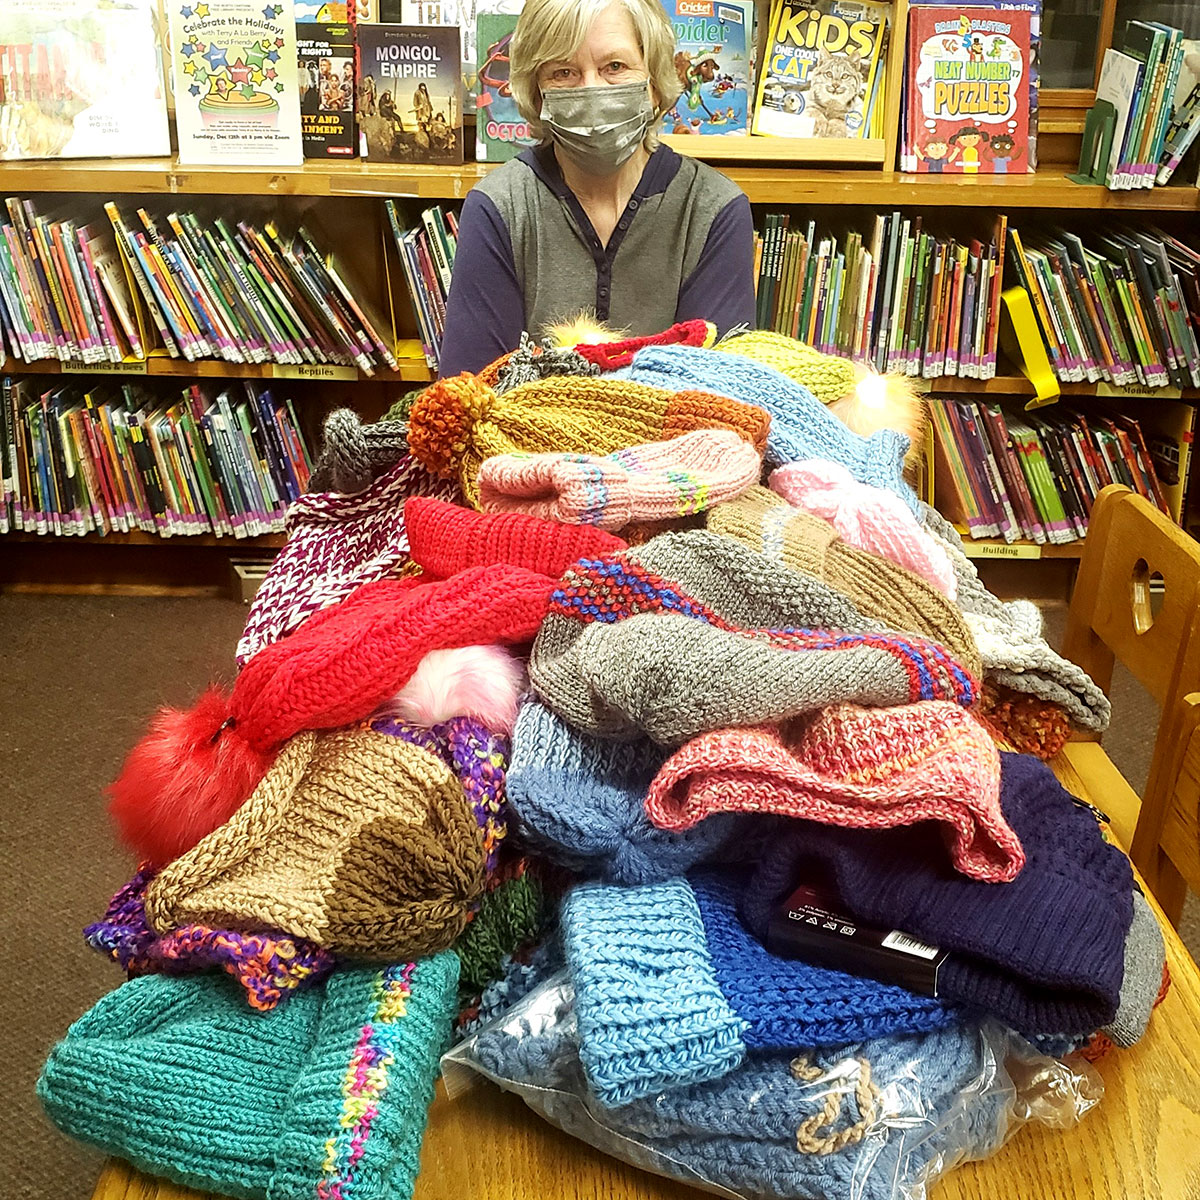 Pile of beautiful, new hats donated for hatsgiving and displayed on a library table